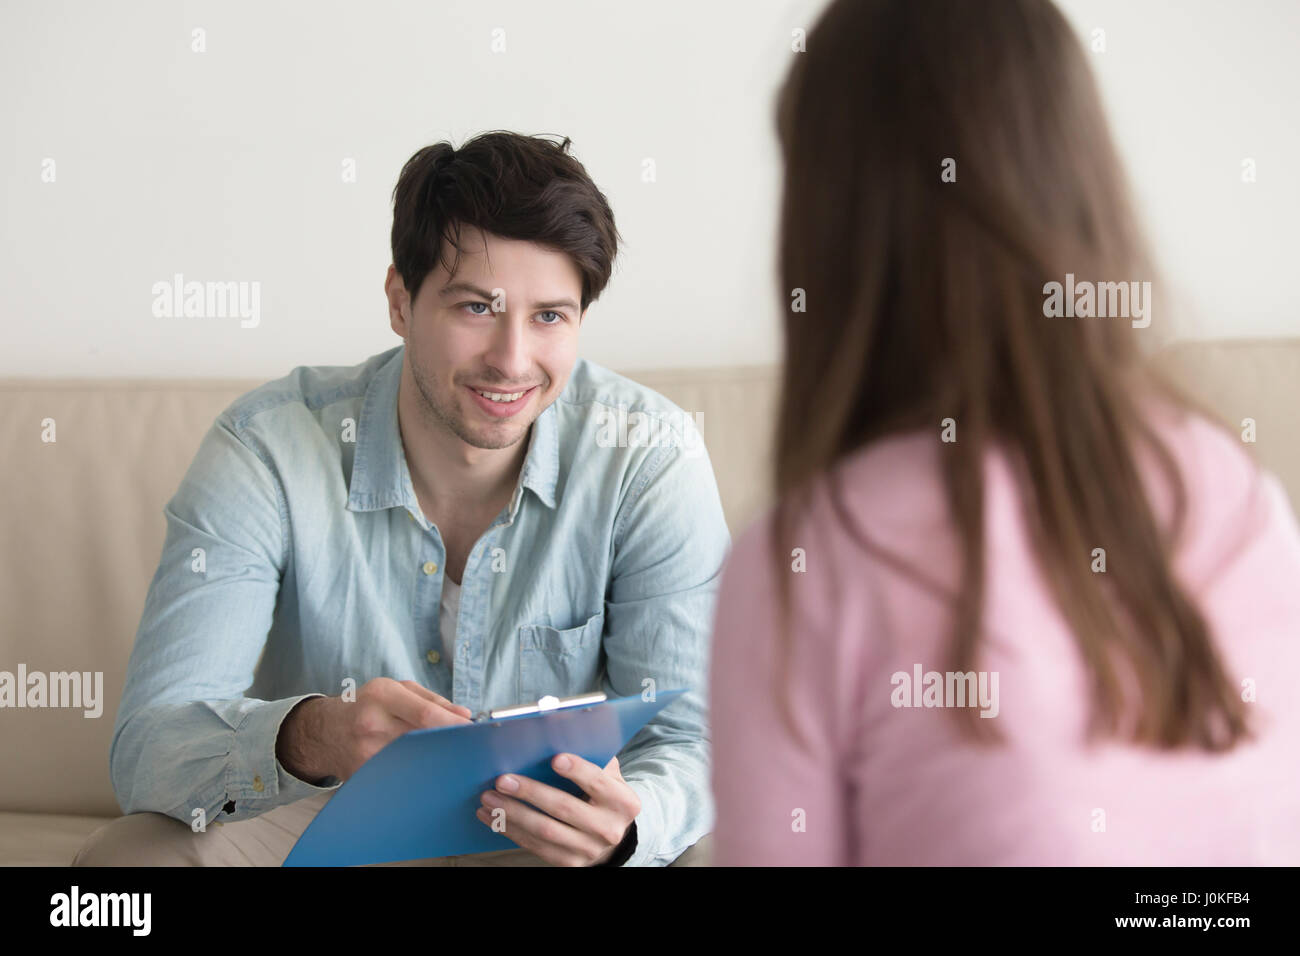 Cheerful man holding clipboard sitting opposite woman, asking or Stock Photo